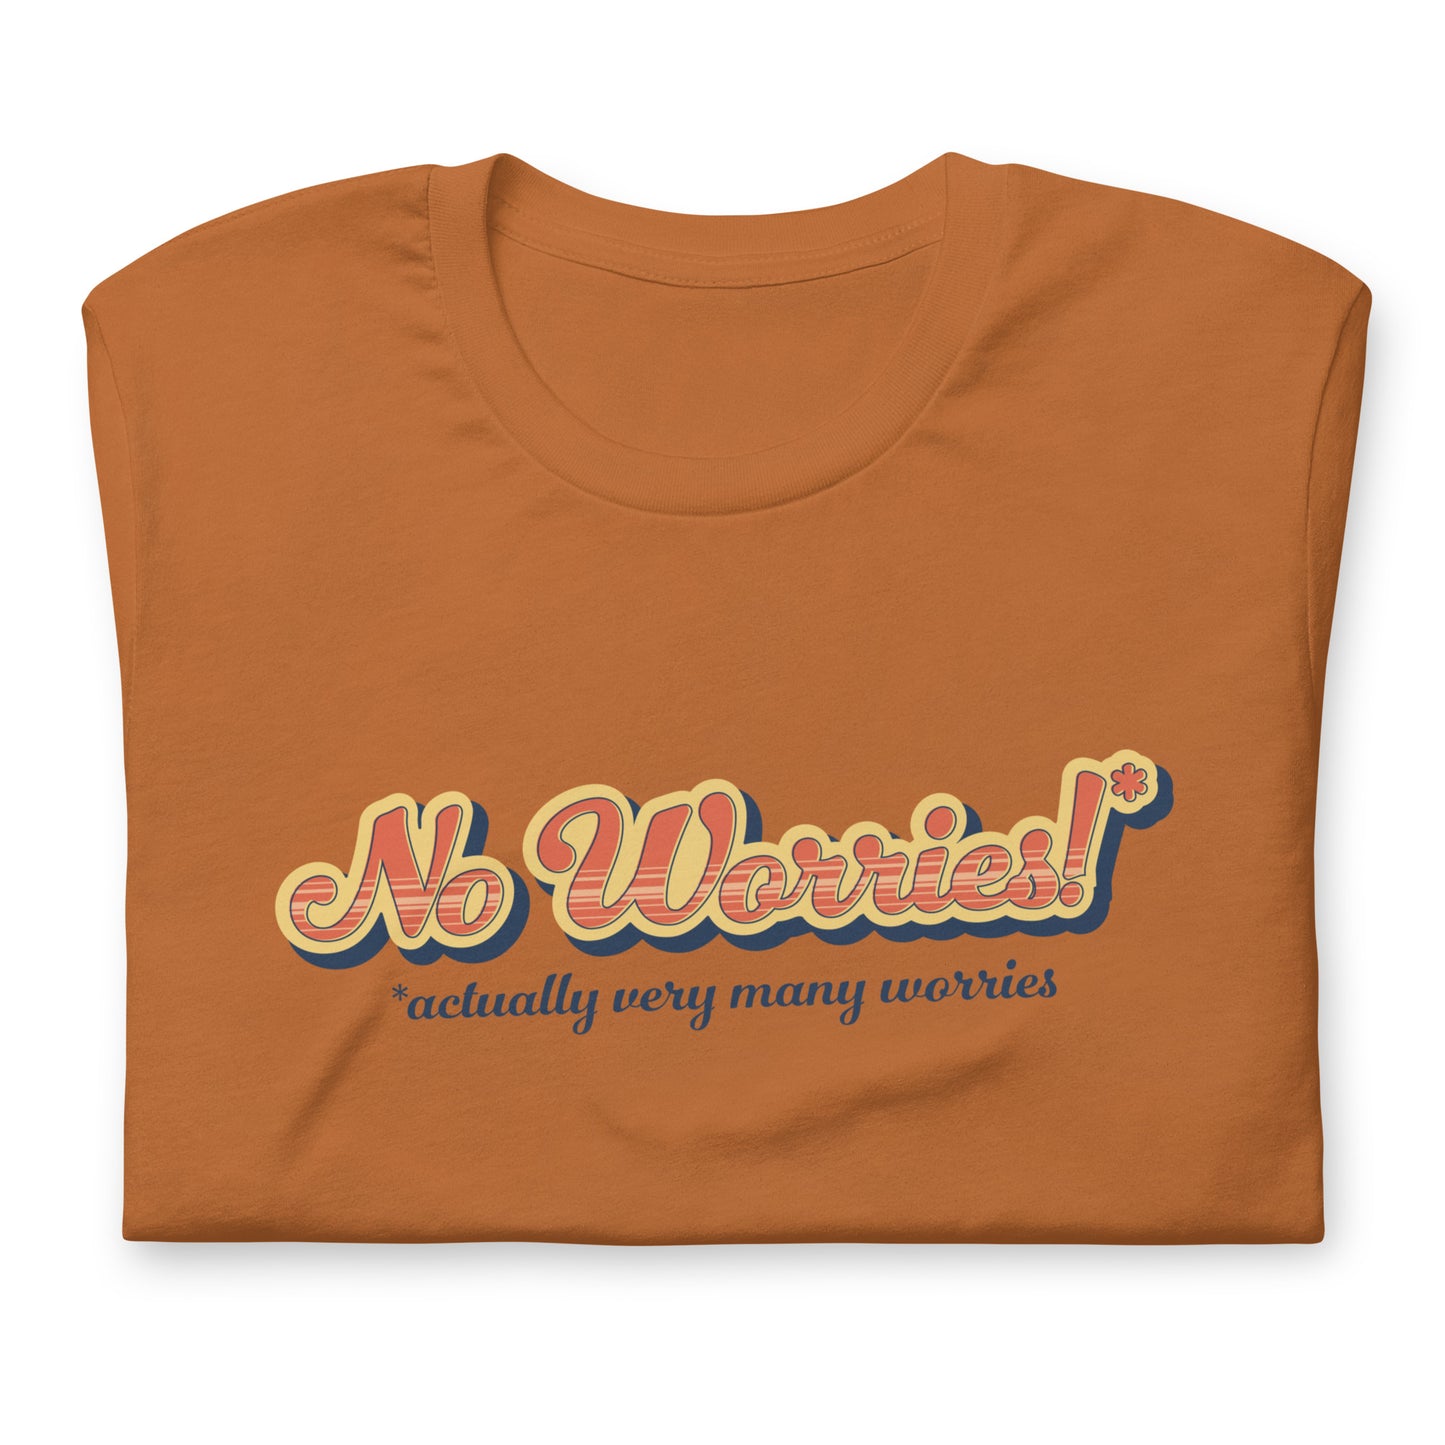 A close up image of a folded orange crewneck t-shirt featuring vintage-style text that reads "No worries!* *actually very many worries"